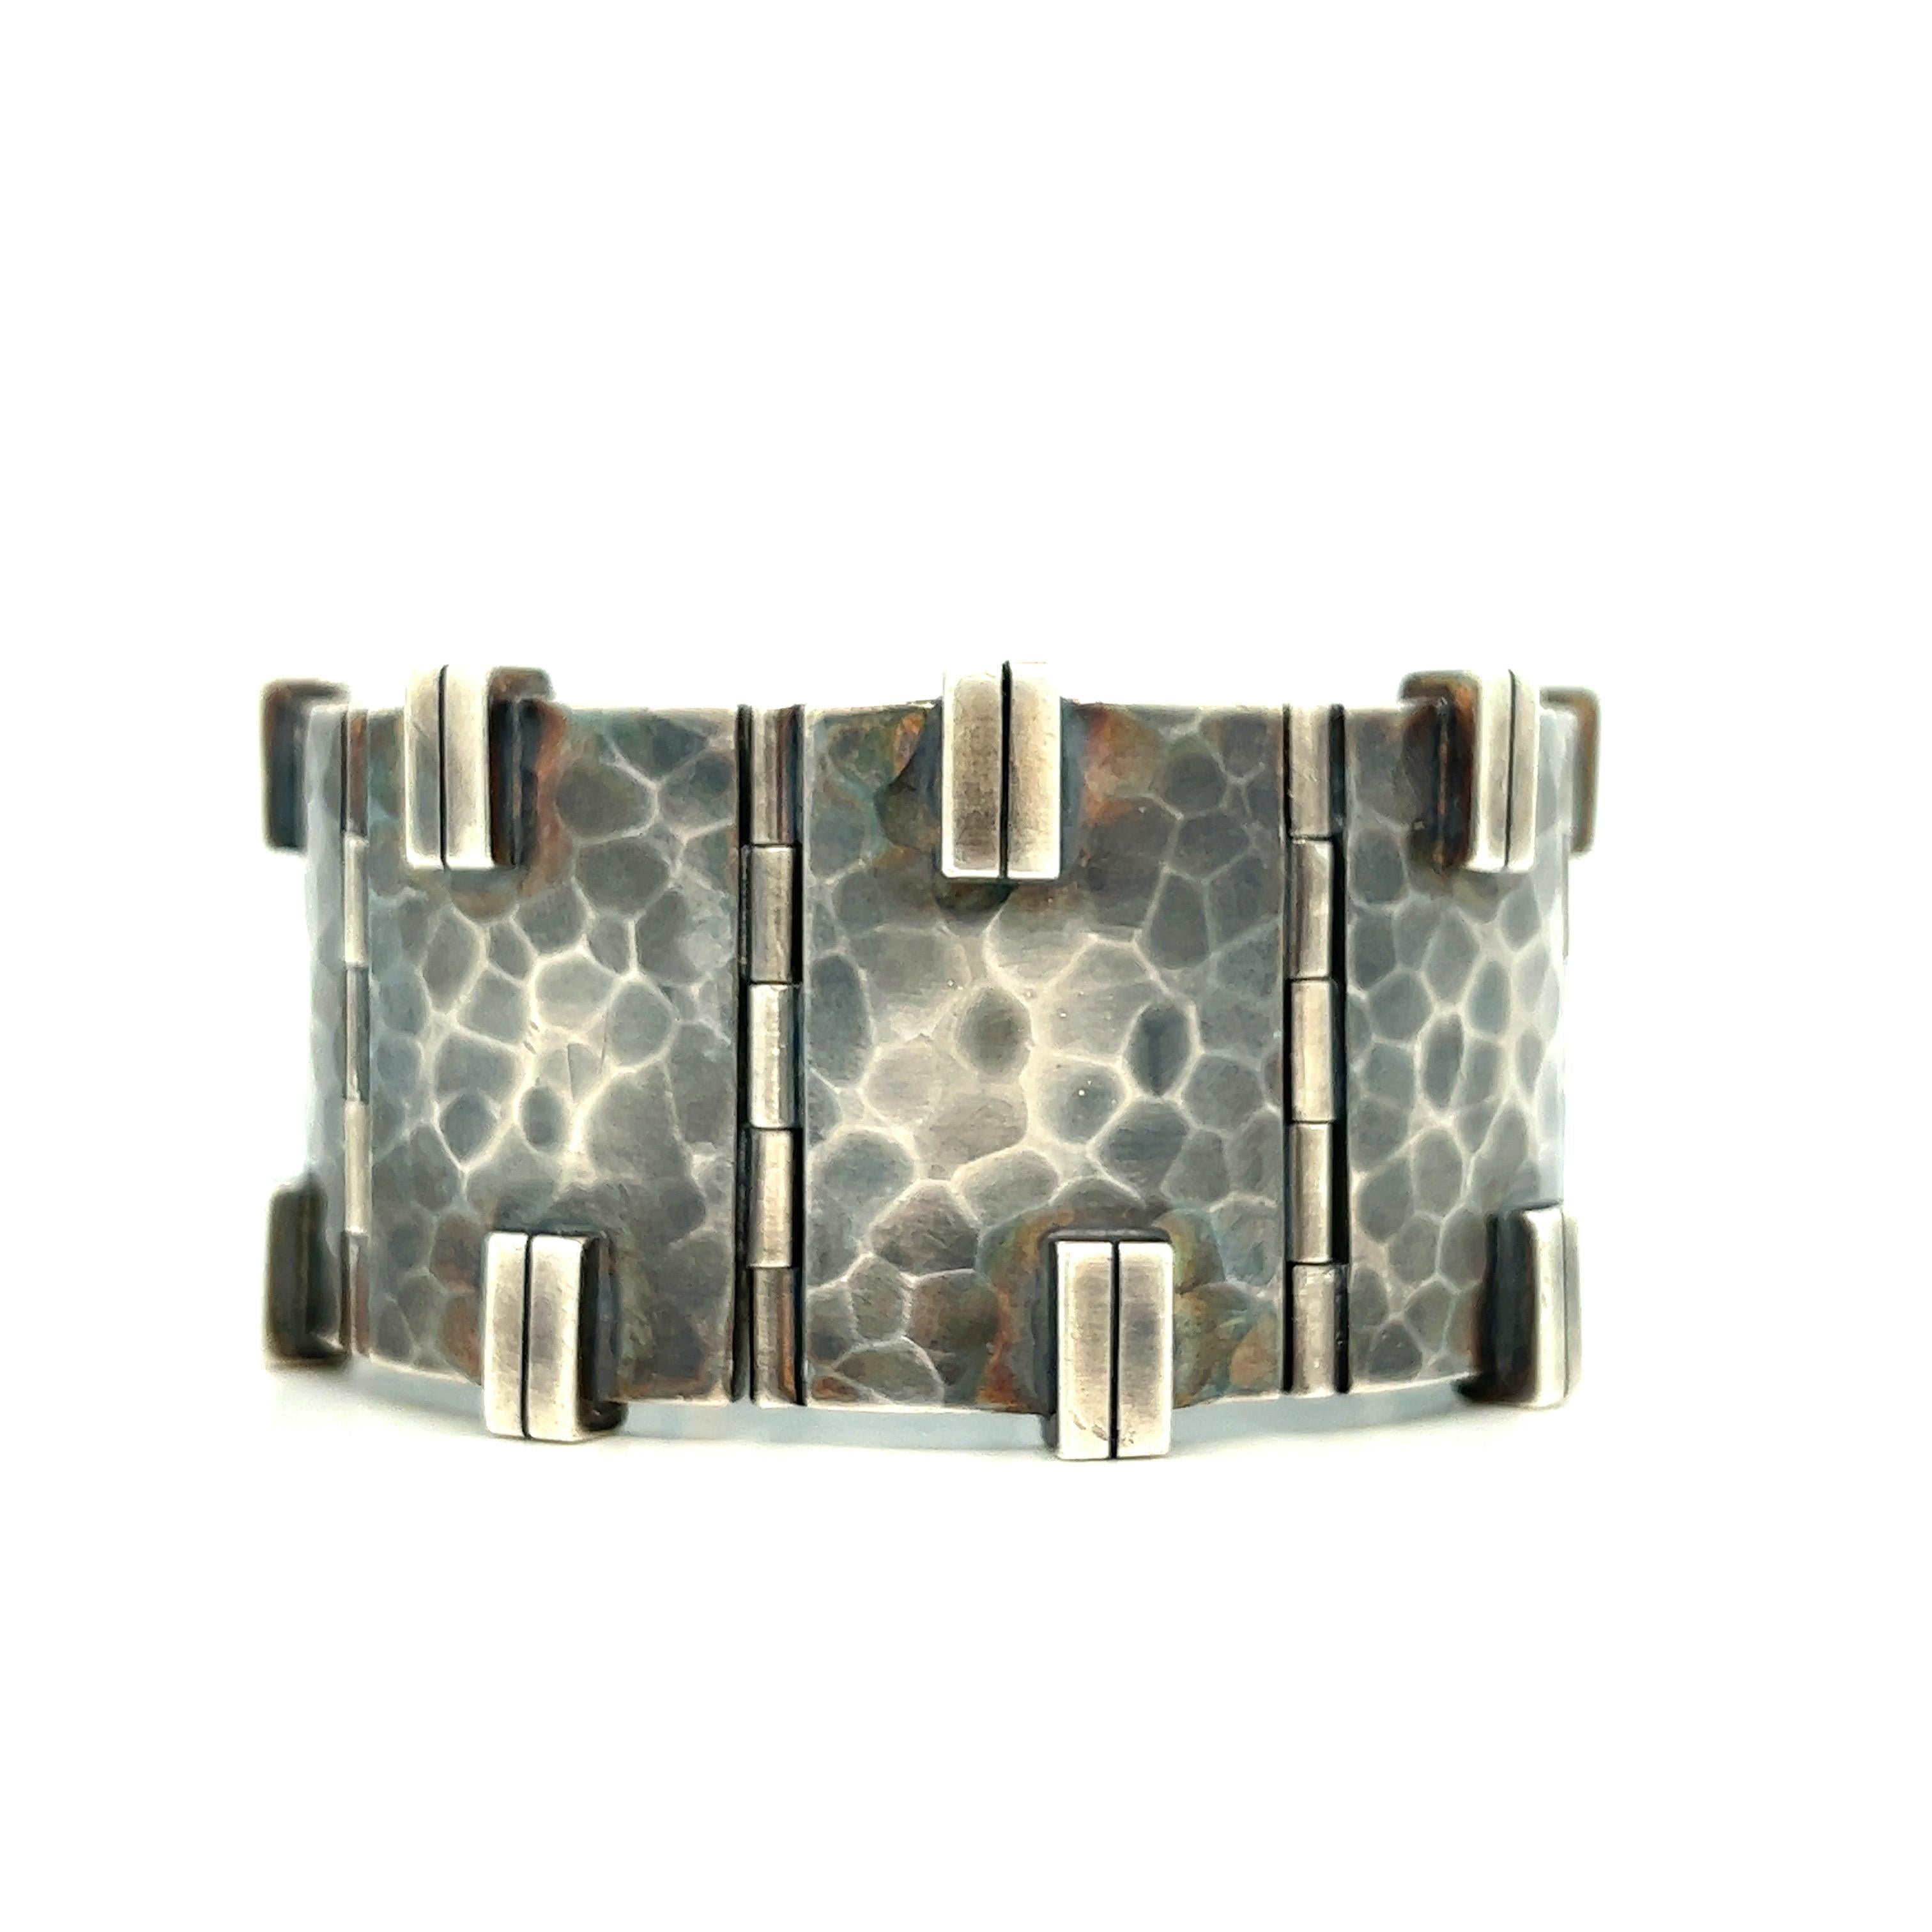 Jean Després hammered silver bracelet, circa 1940s

Art deco design of hammered silver links; French

Size: width 1.44 inches, length 8 inches
Total weight: 144.7 grams 